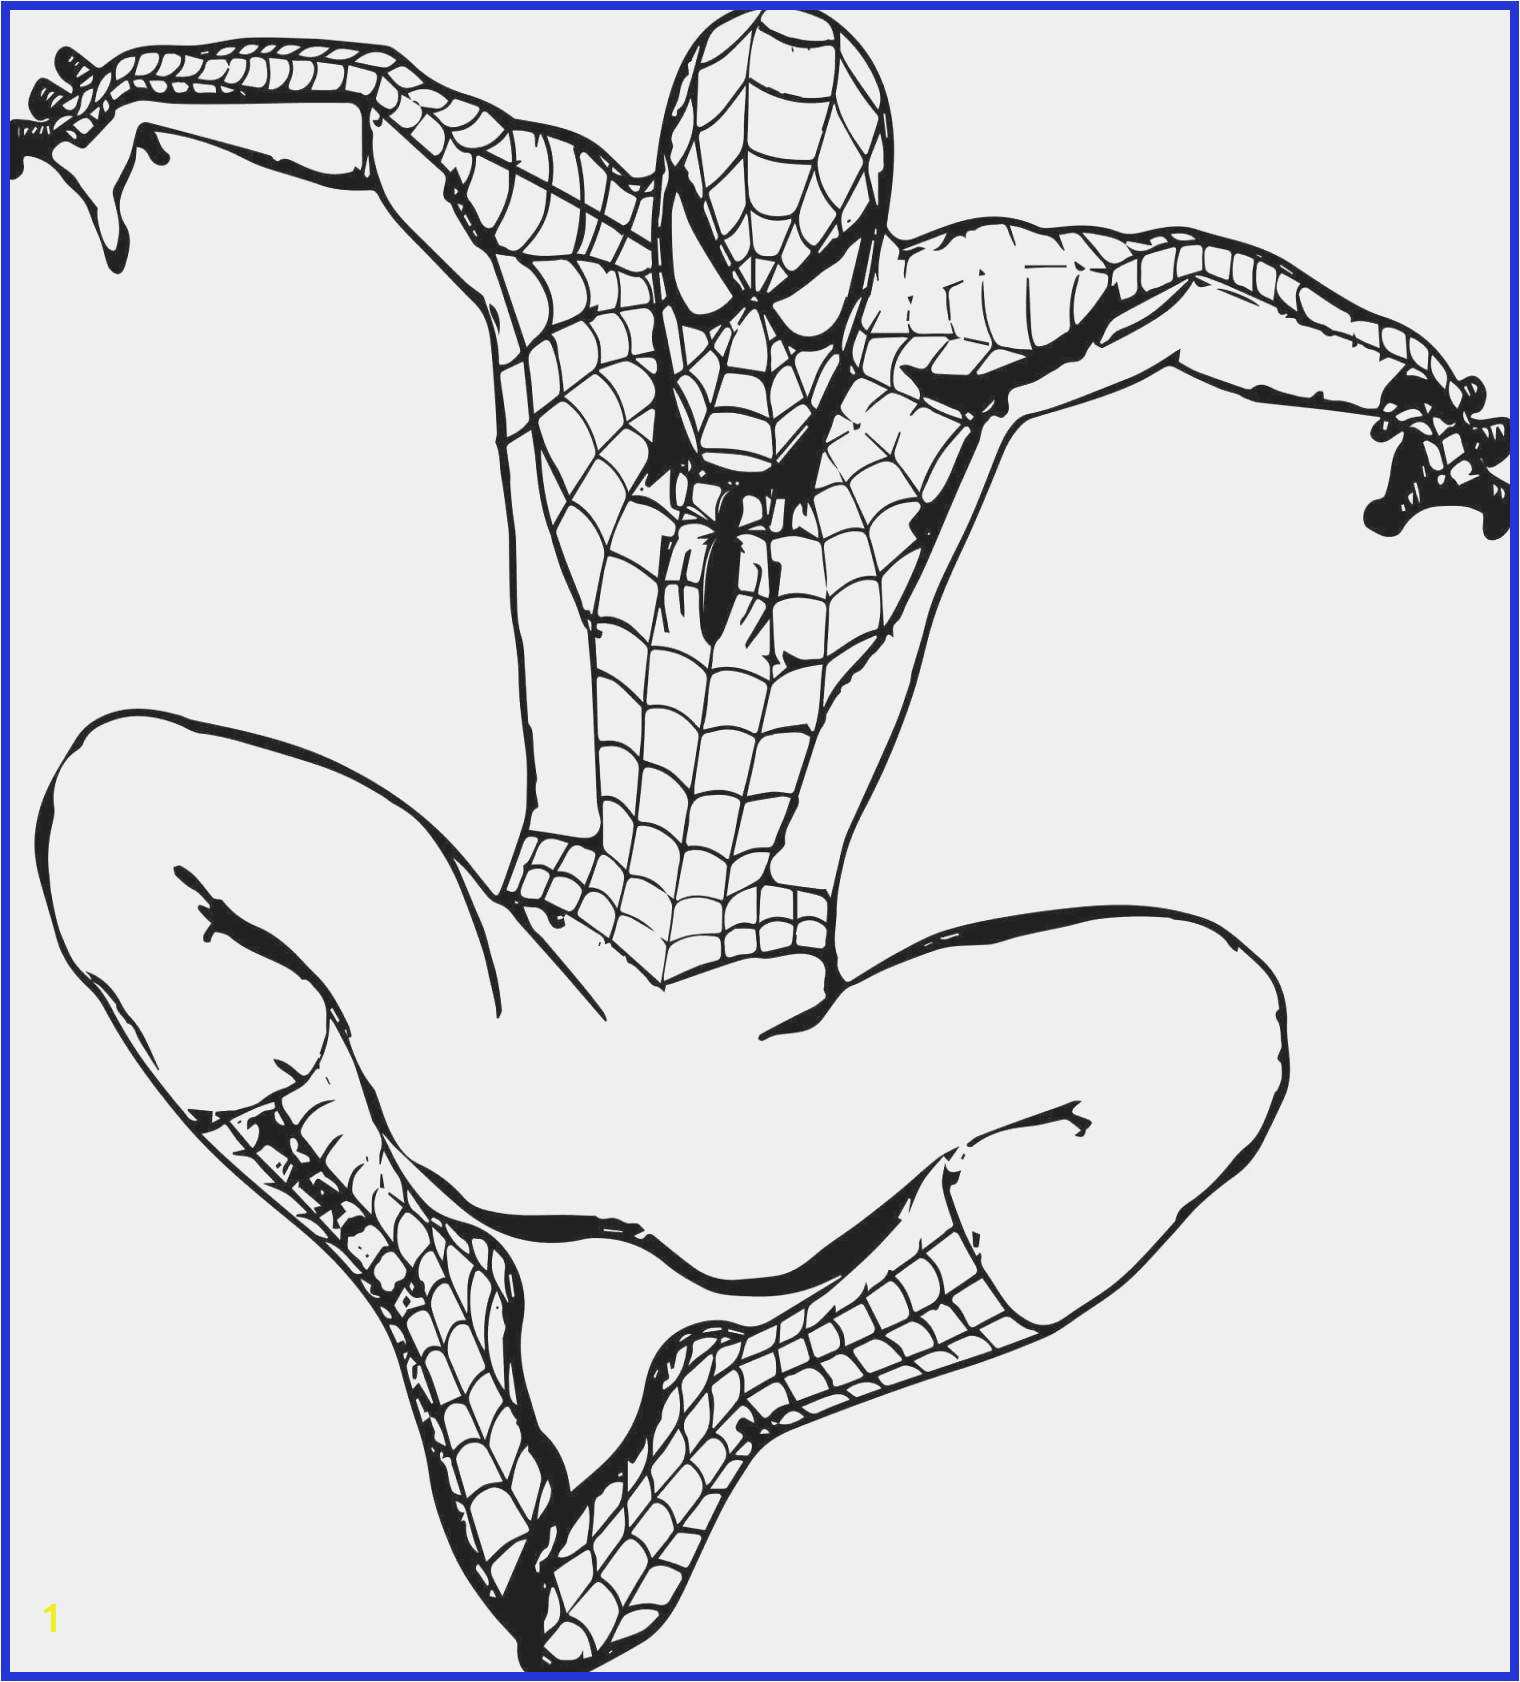 drawings for coloring luxury images coloring pages spiderman superheroes easy to draw spiderman coloring of drawings for coloring